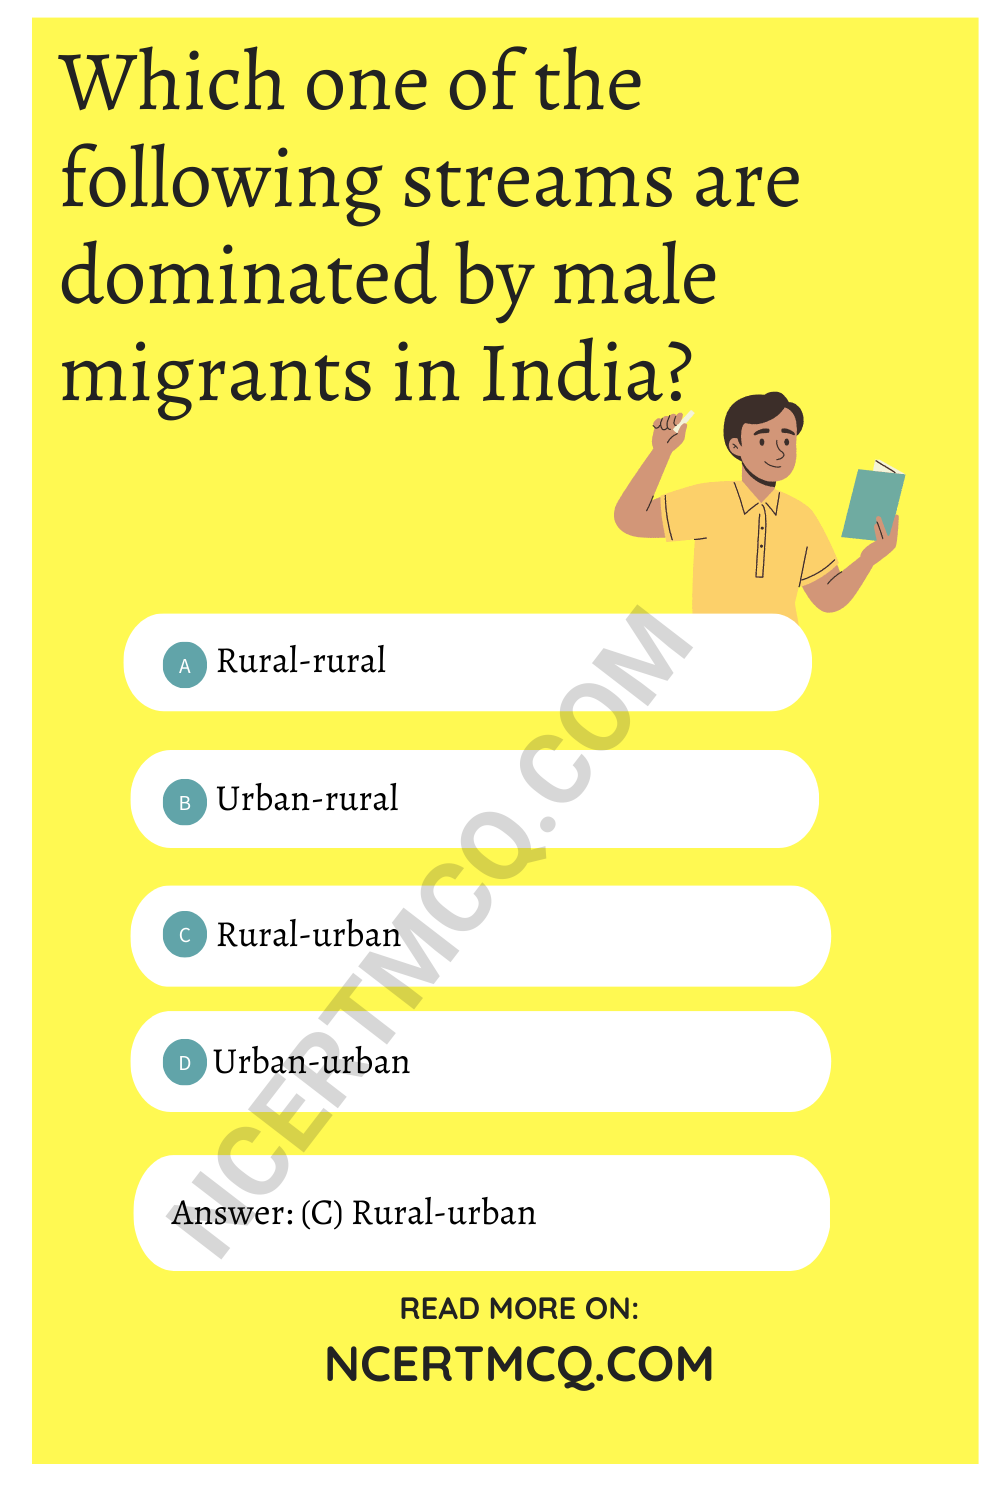 Which one of the following streams are dominated by male migrants in India?